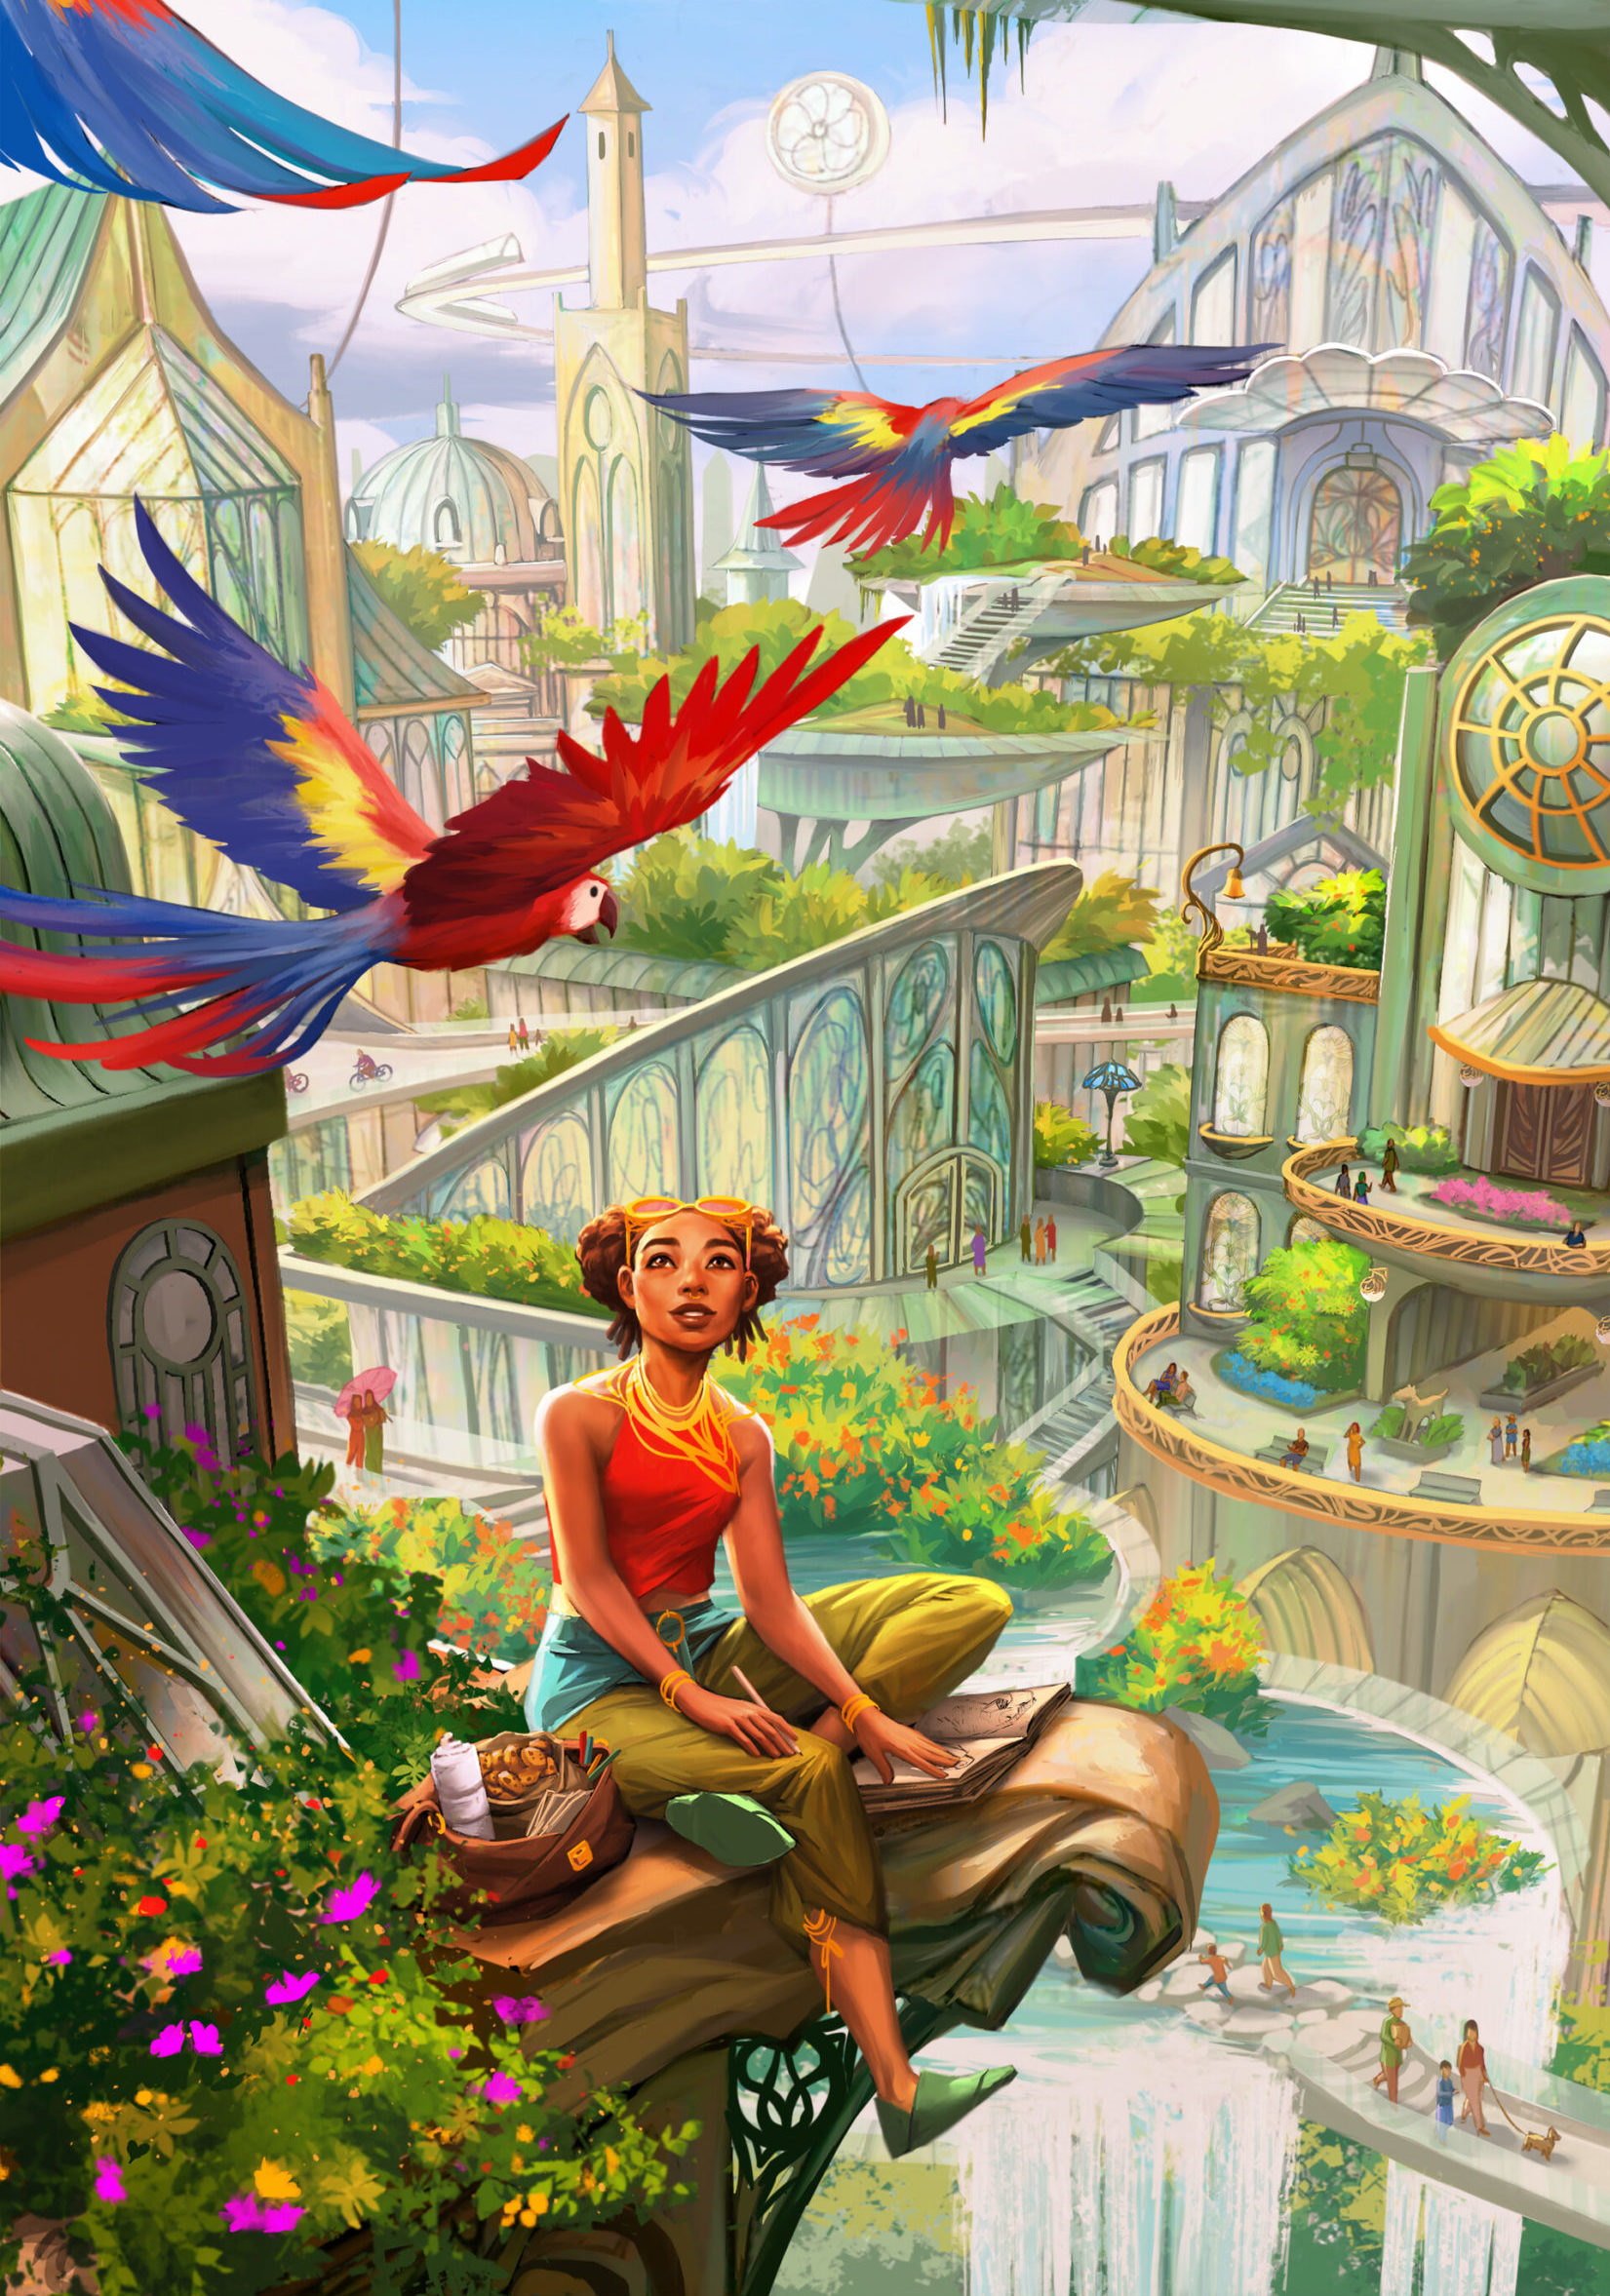 Solarpunk: Visions of a just, nature-positive world